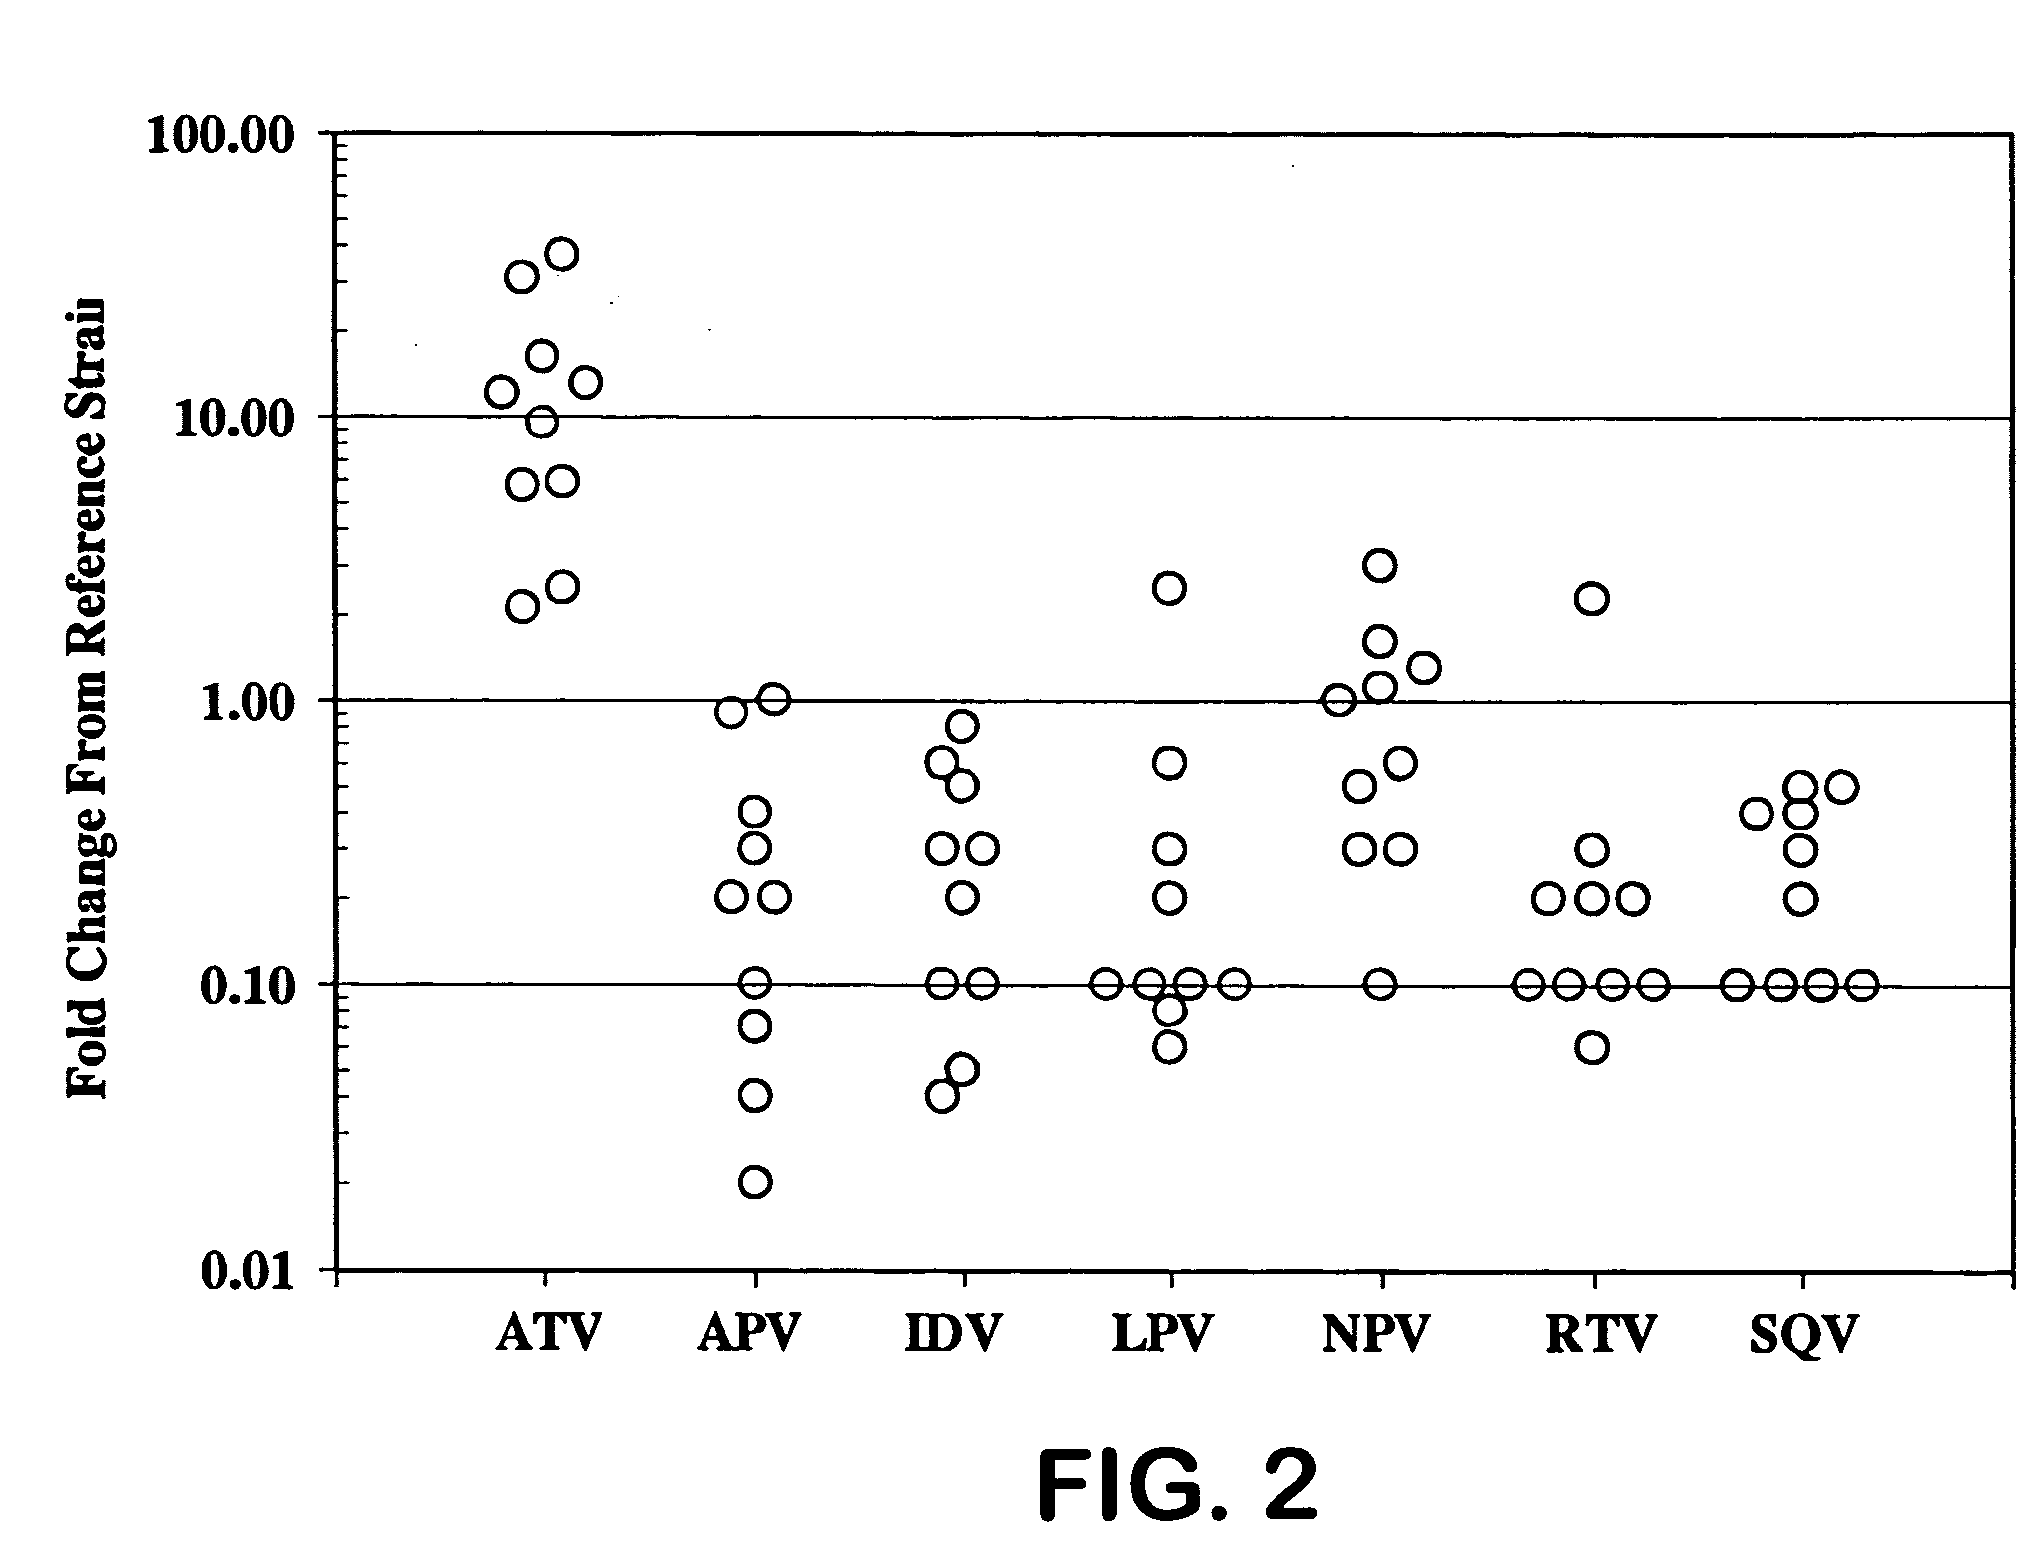 Method of treating HIV infection in atazanavir-resistant patients using a combination of atazanavir and another protease inhibitor